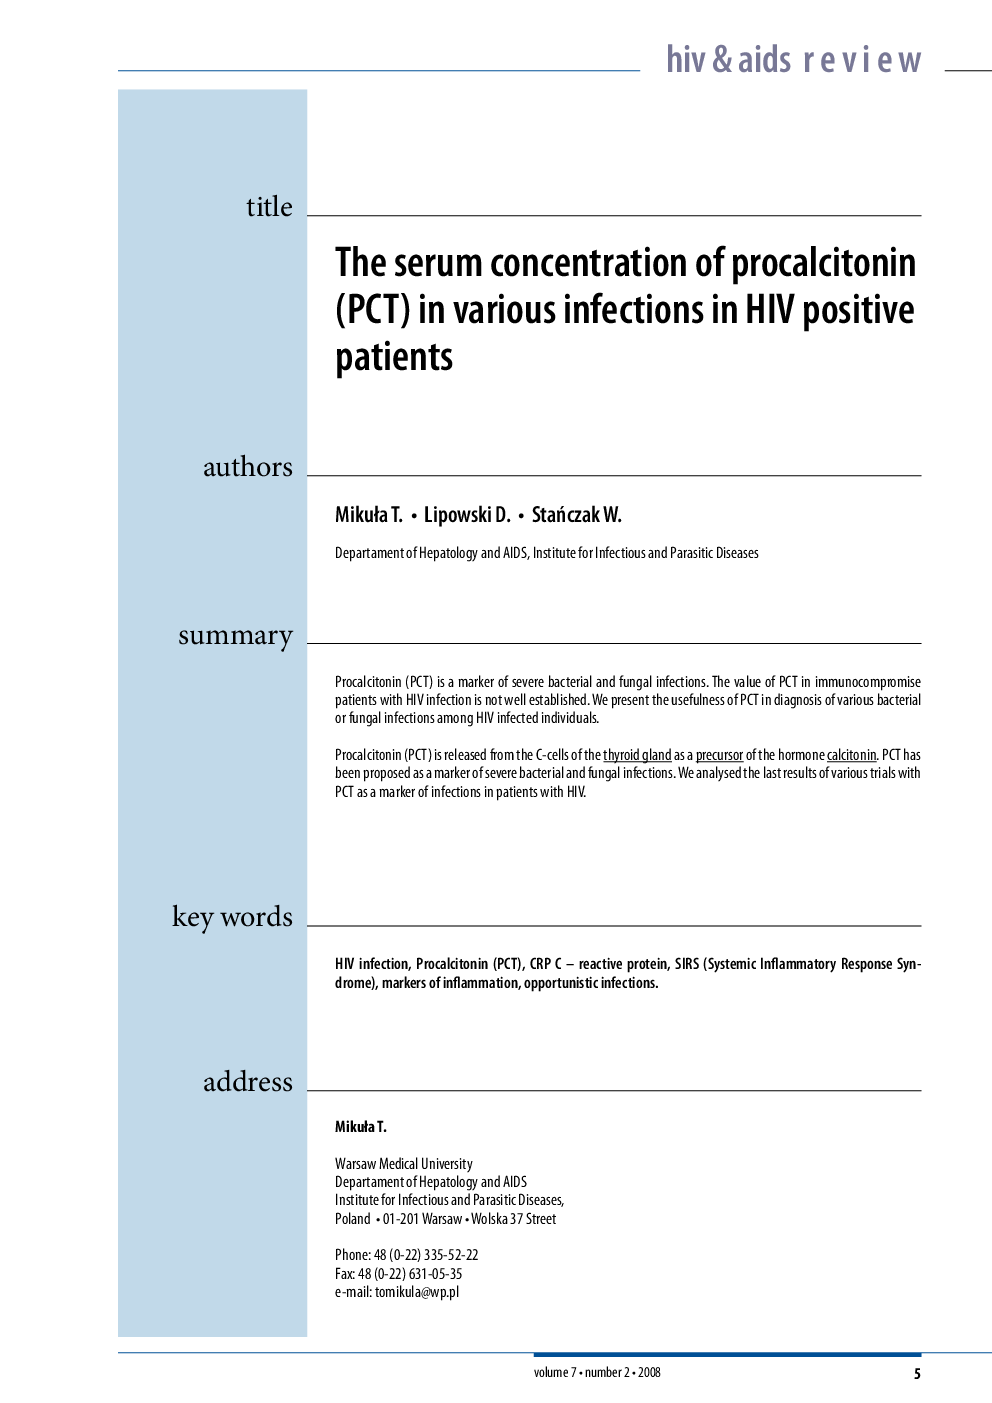 The serum concentration of procalcitonin (PCT) in various infections in HIV positive patients